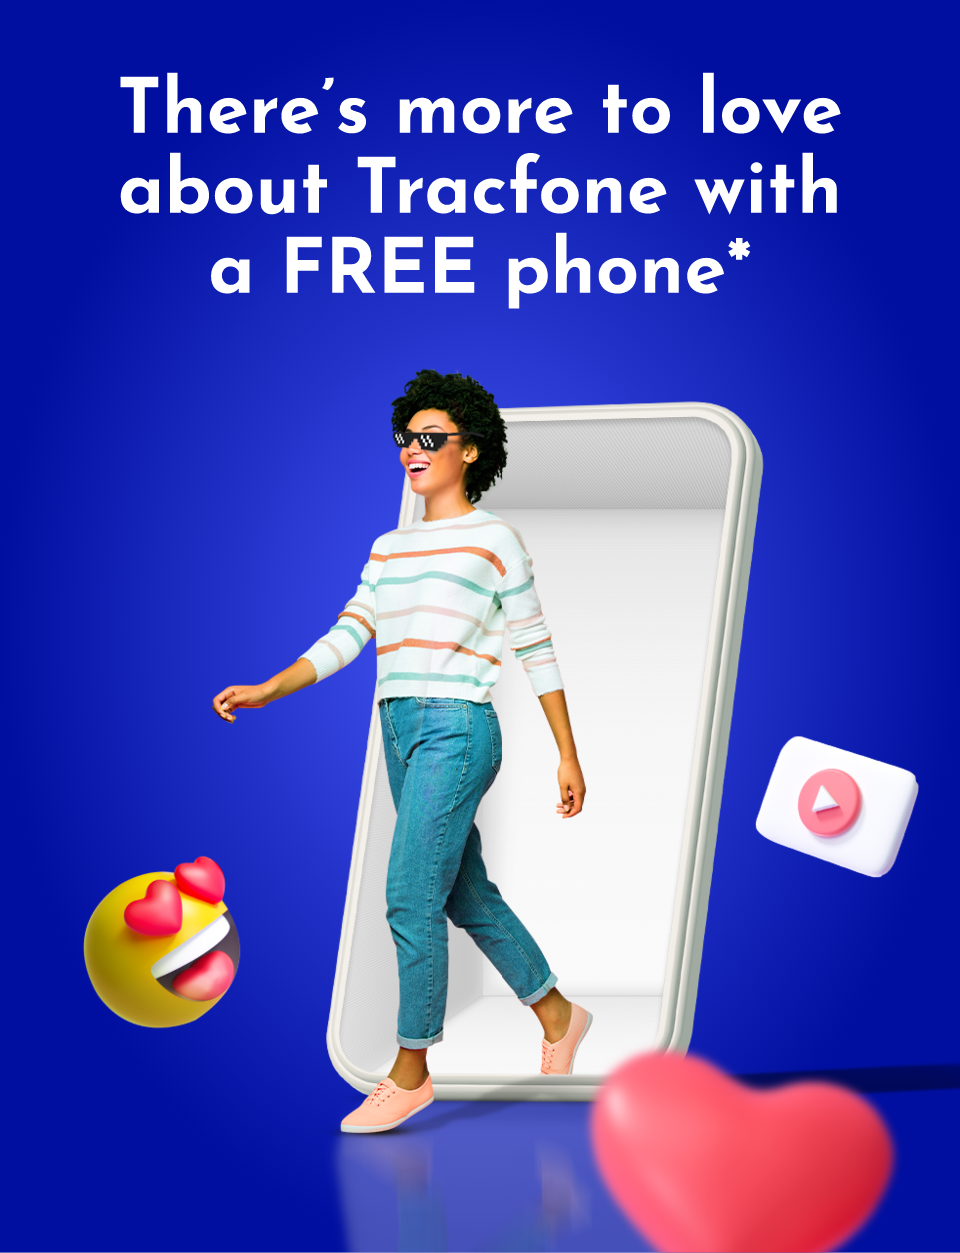 There's more to love about Tracfone with a FREE phone